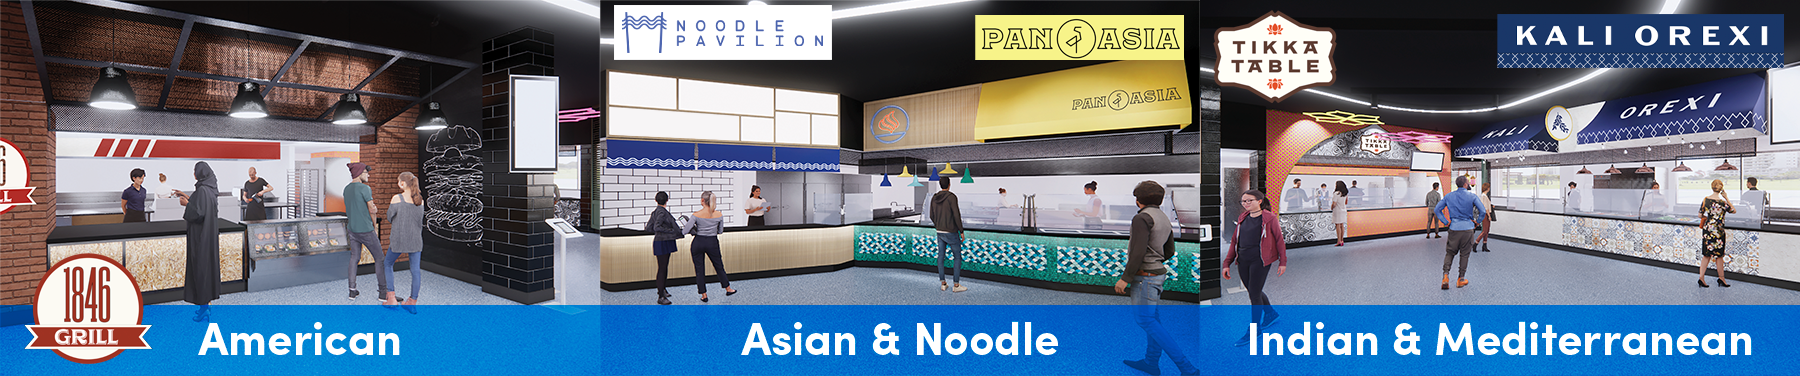 American, Asian & Noodle, and Indian & Mediterranean station mockups